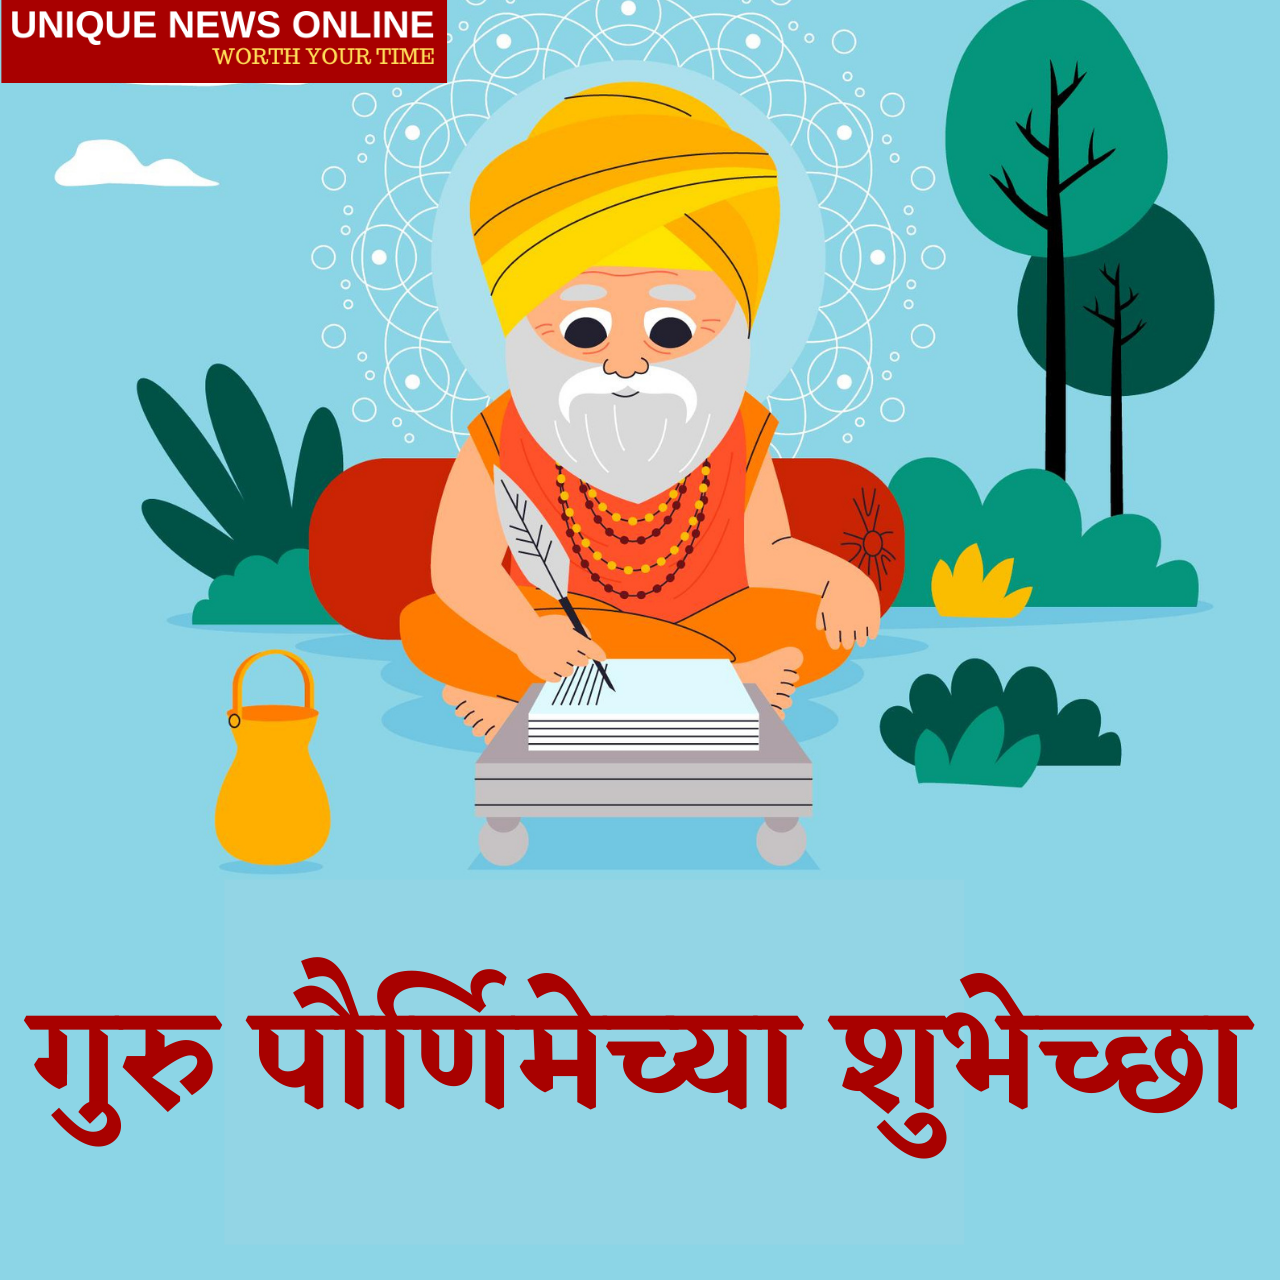 Guru Purnima 2021 Marathi Quotes, HD Images, Wishes, Status, Greetings, and Messages to share